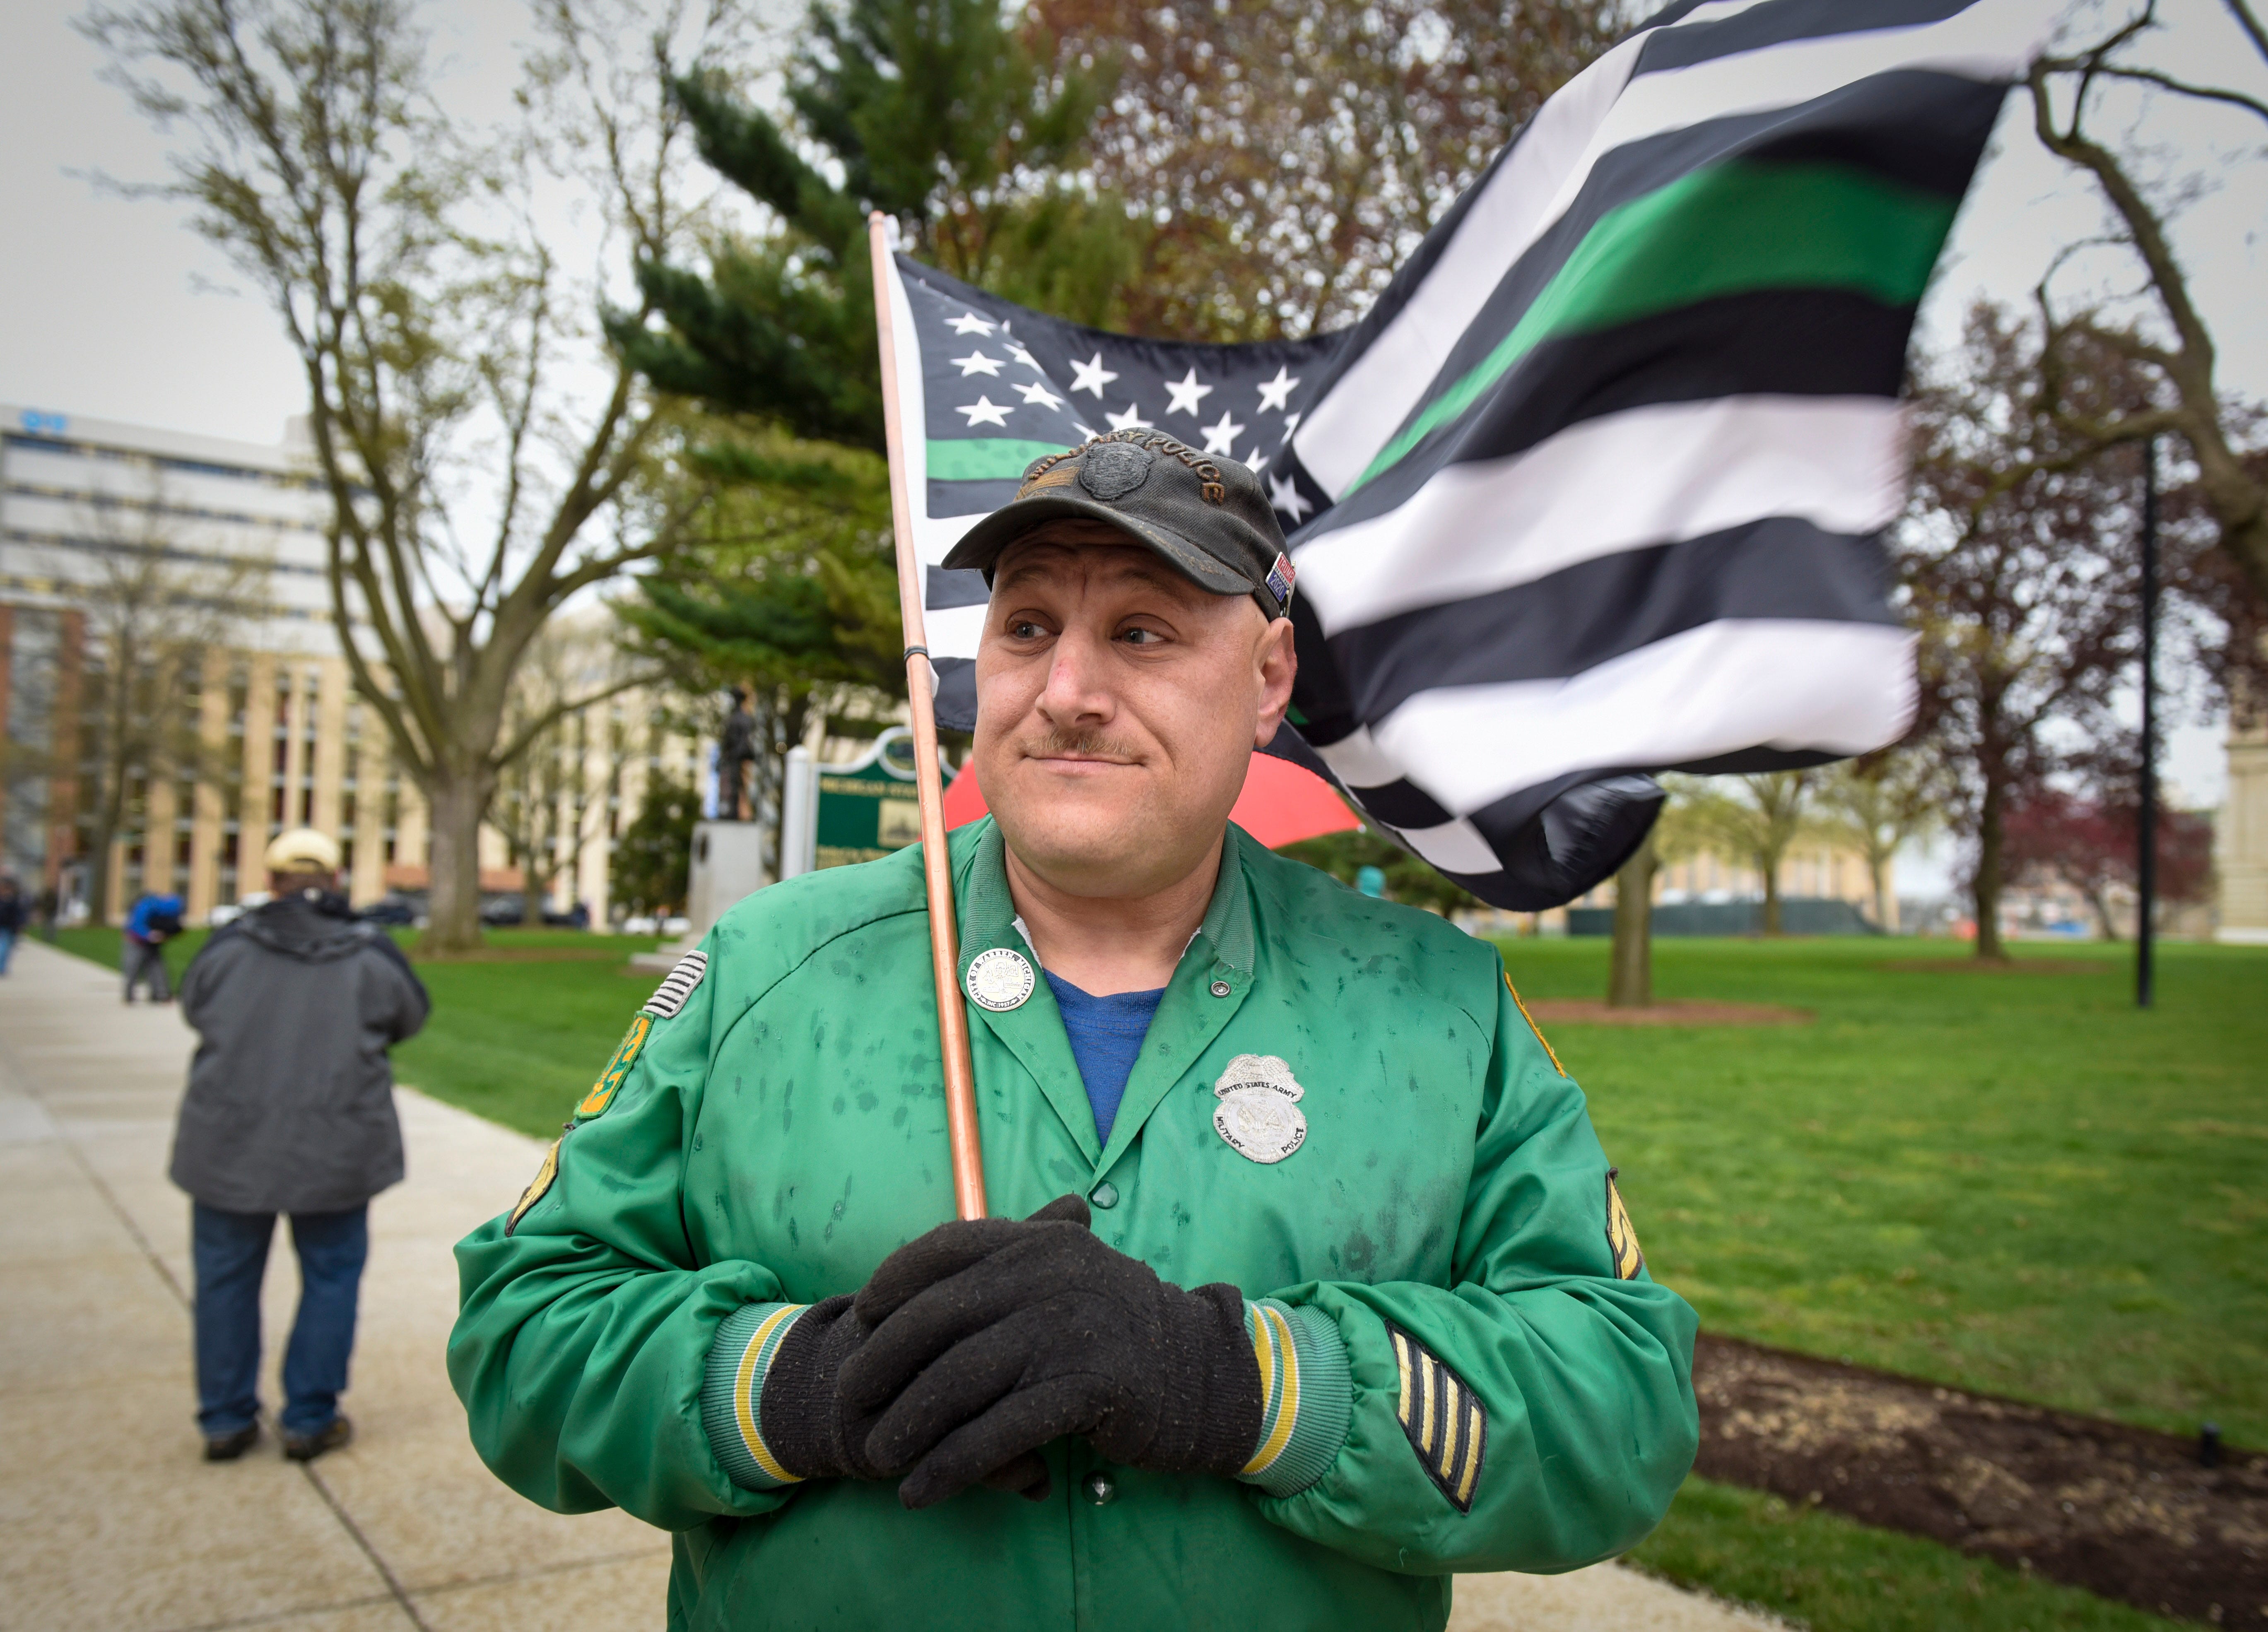 Warren city councilman Eddie Kabacinski holds a flag during a protest at the state Capitol to oppose the executive orders Gov. Gretchen Whitmer issued in response to the coronavirus pandemic, Thursday, May 14, 2020.